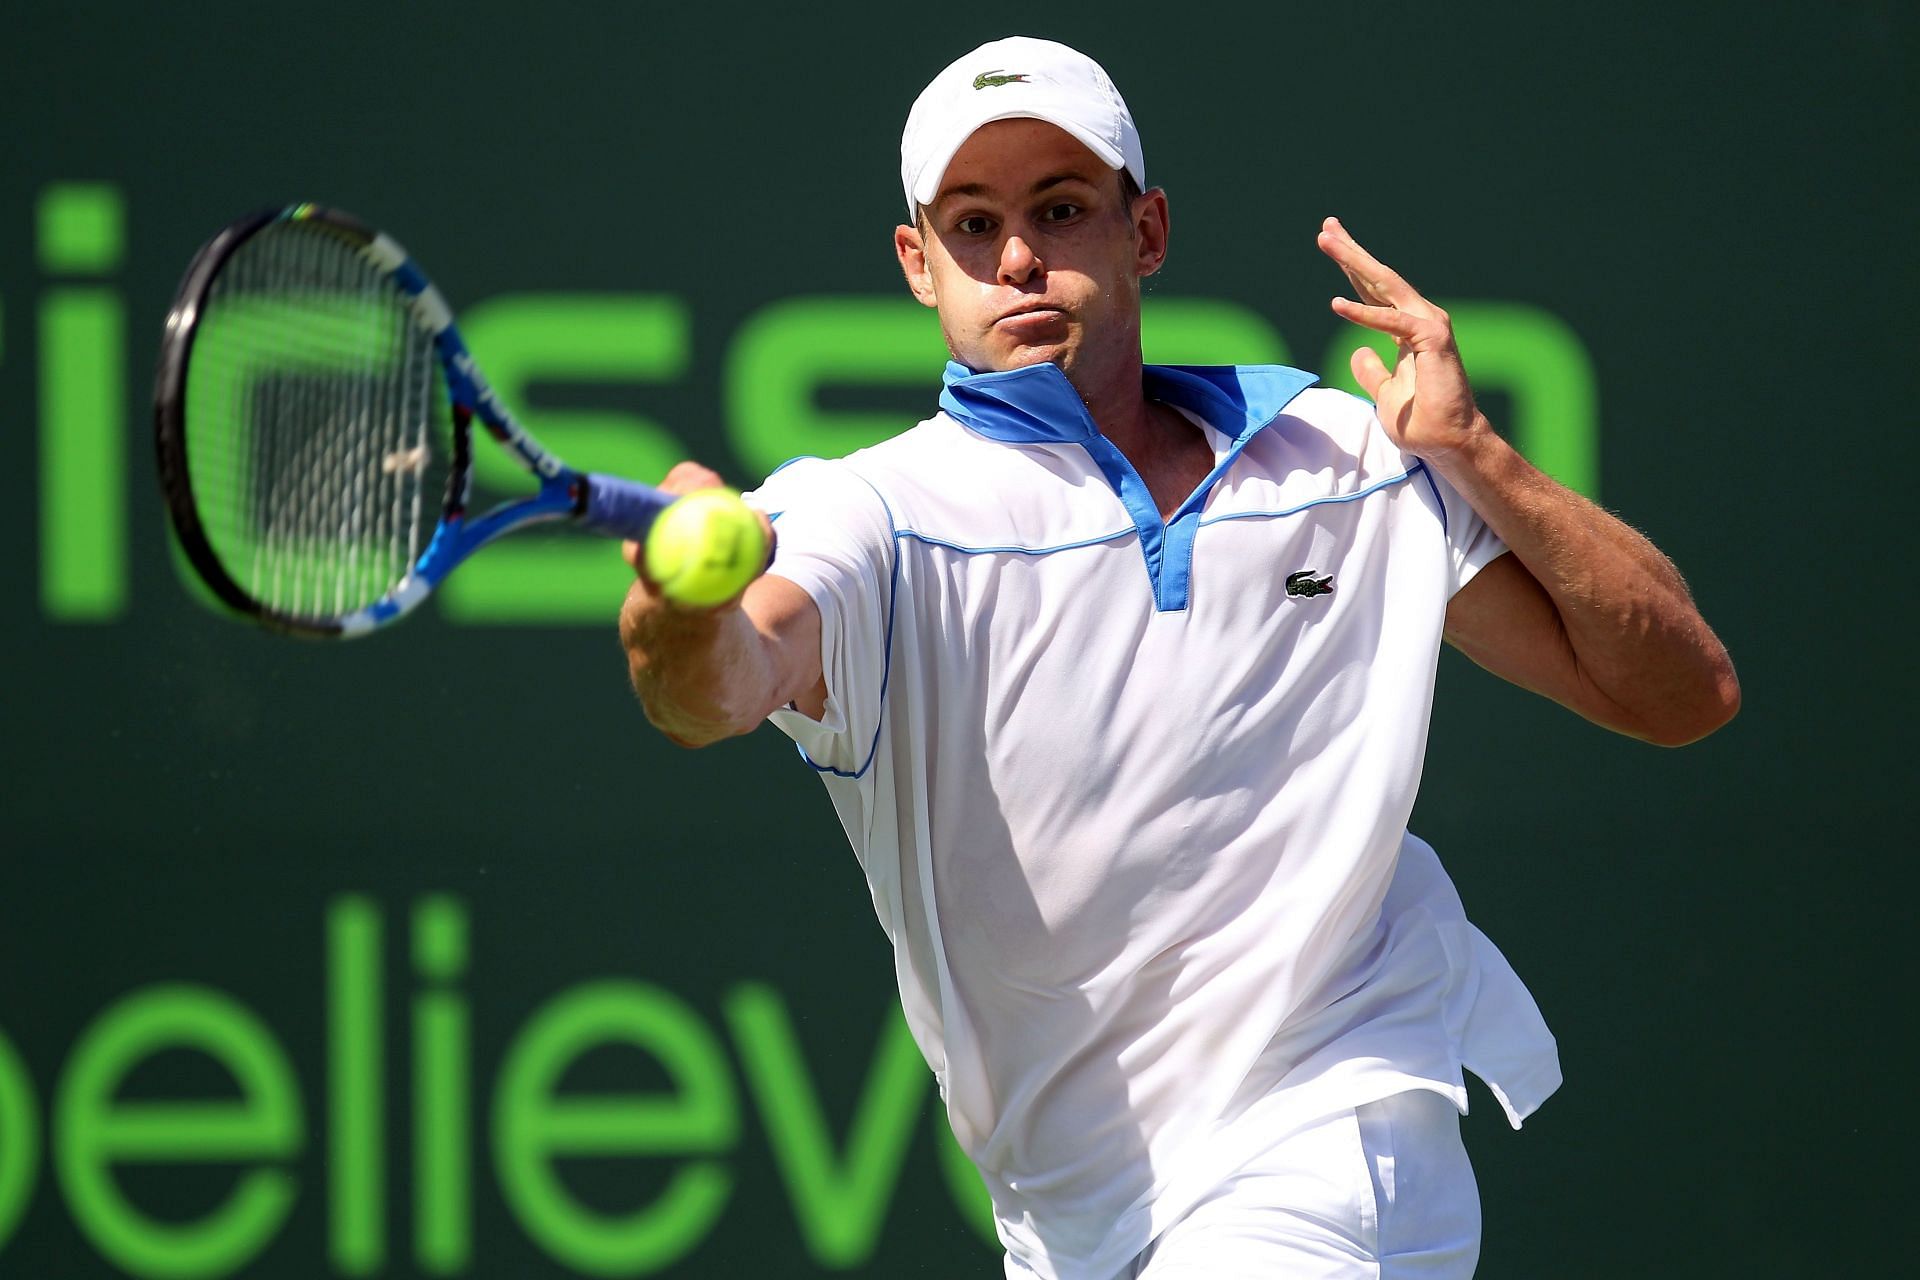 Andy Roddick hits a forehand during the 2012 Miami Open.